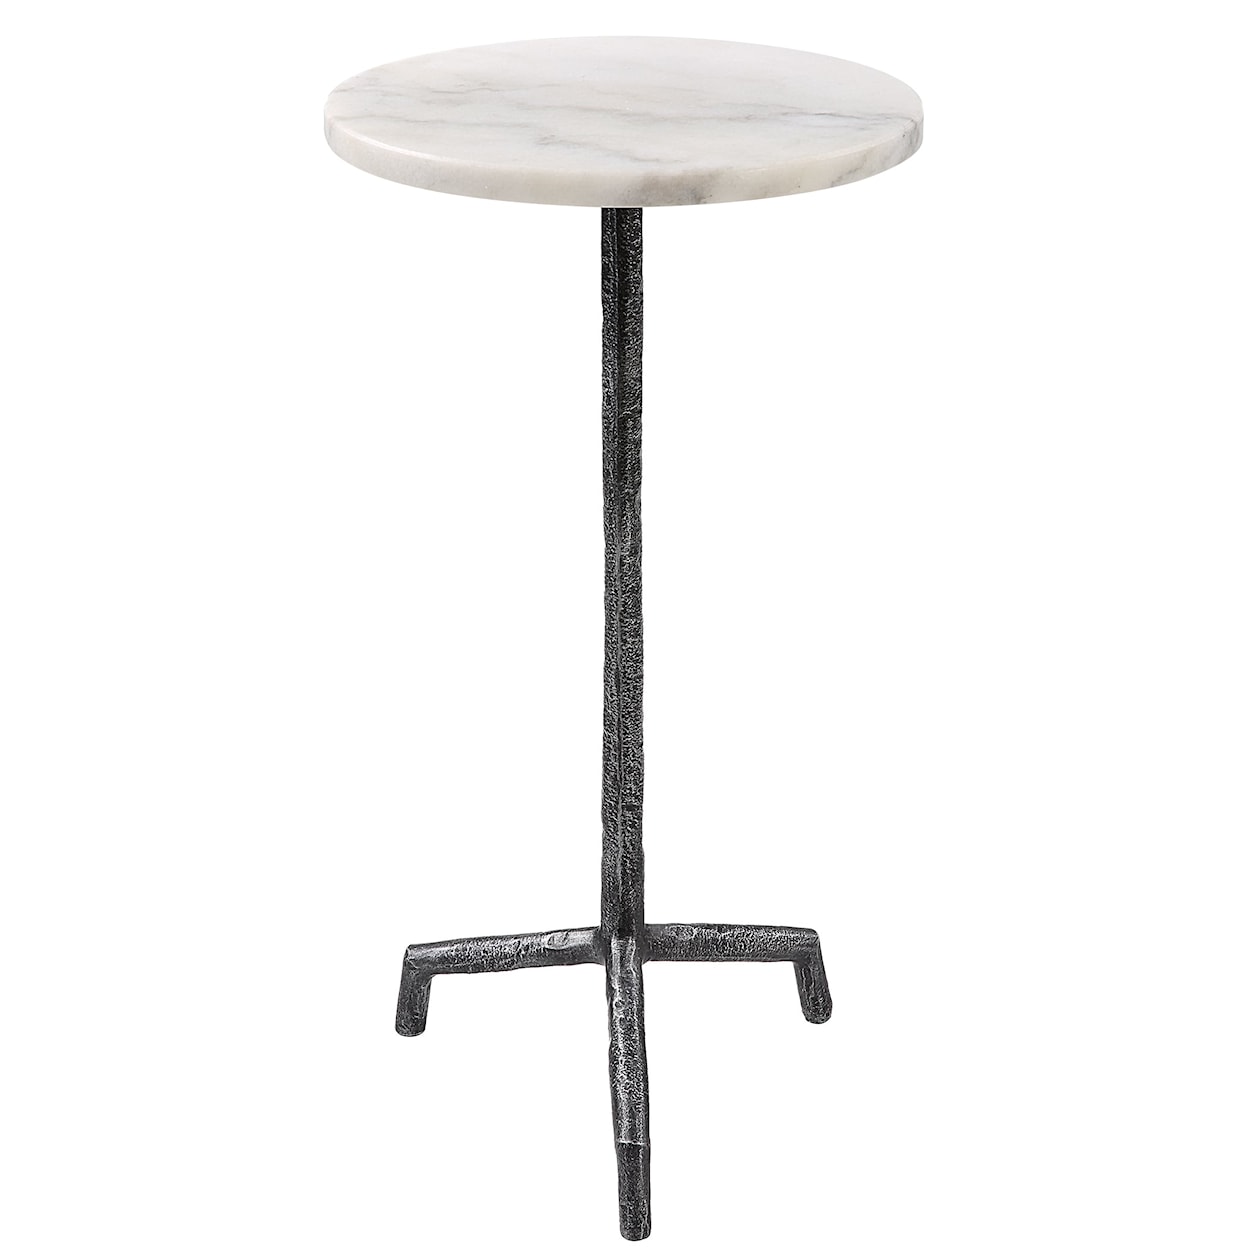 Uttermost Puritan Puritan White Marble Drink Table